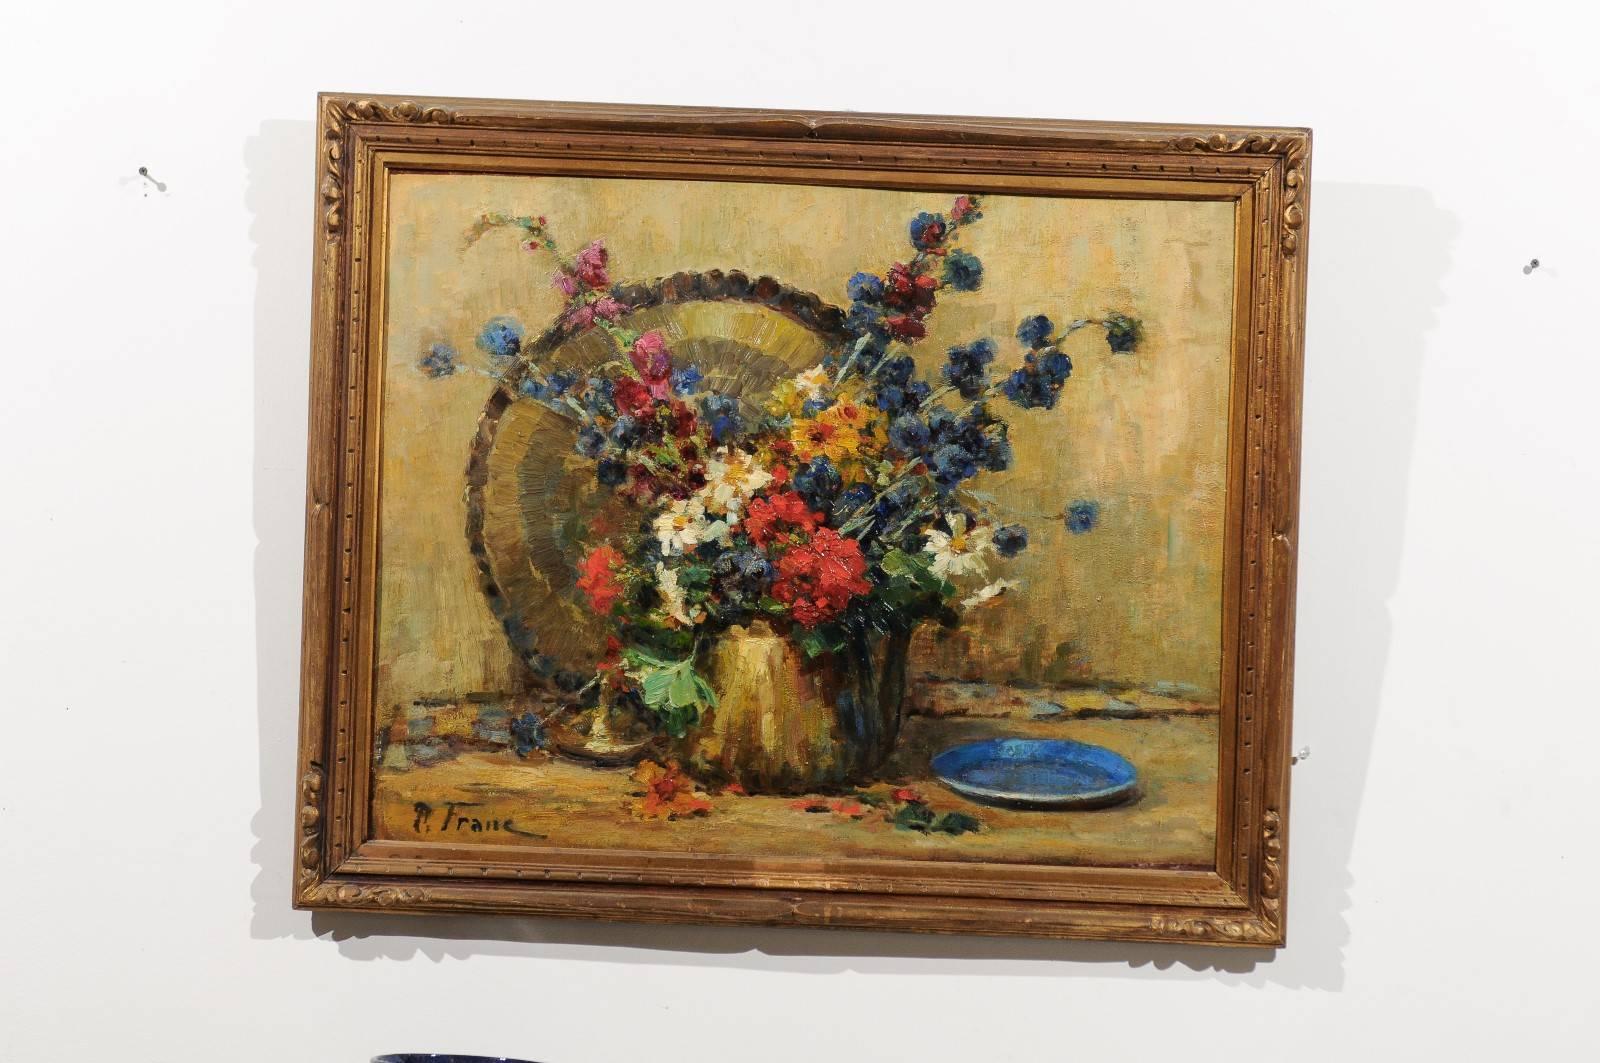 A French still life floral oil painting from the 19th century signed Pierre Franc inside a giltwood frame. This French painting features an exquisite floral still-life, made of a colorful bouquet of flowers set inside a copper looking pitcher. The